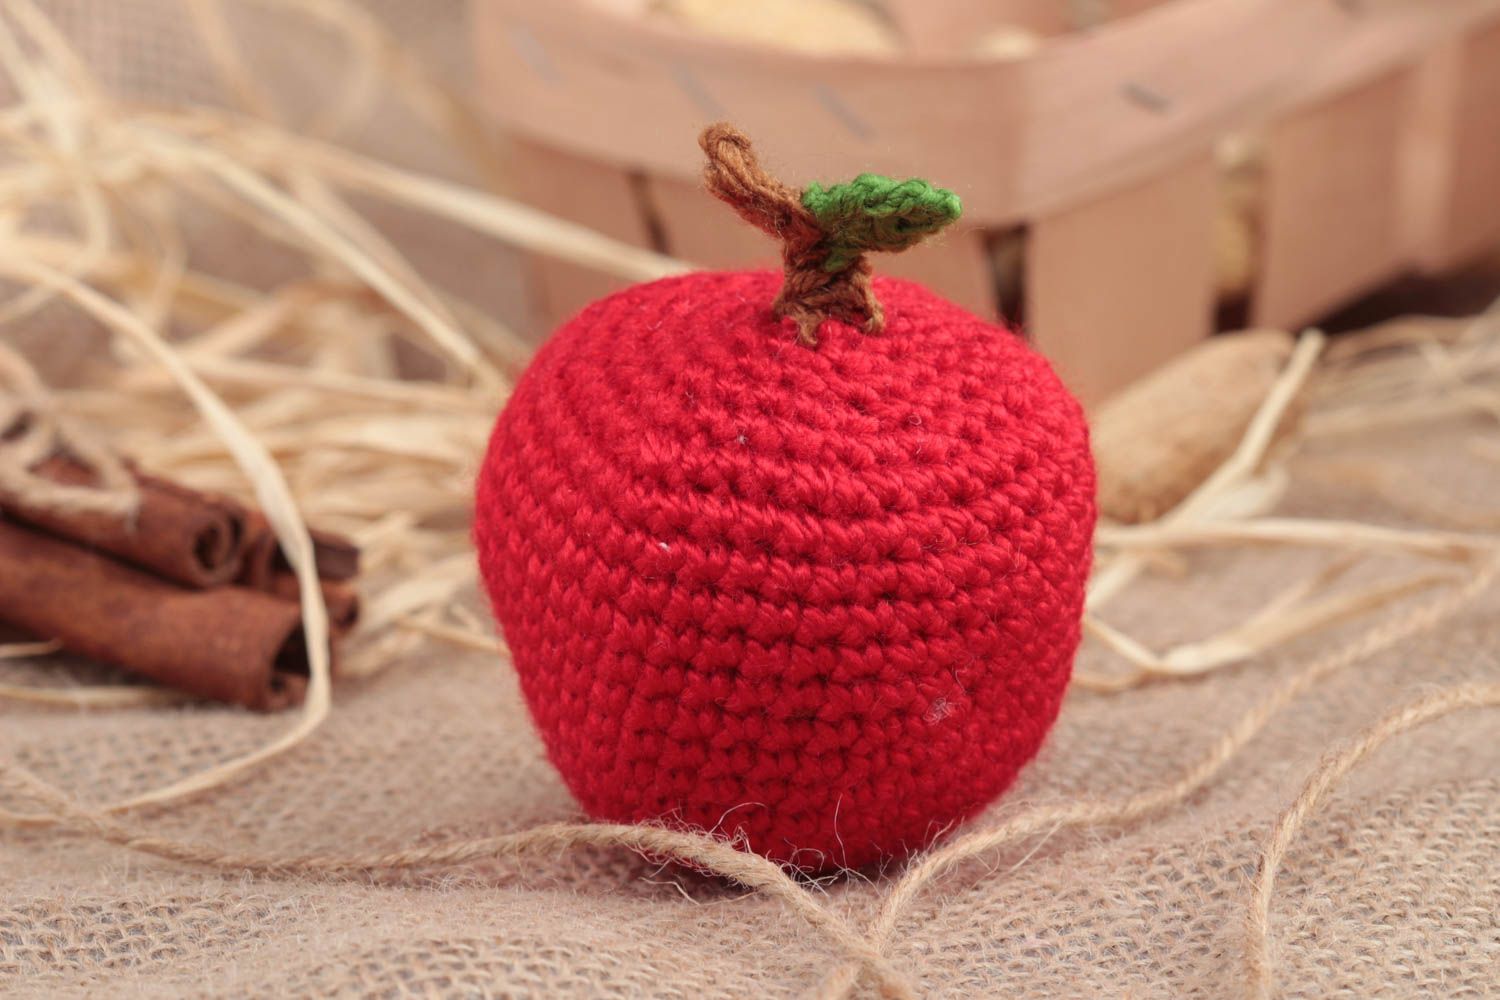 Handmade small crochet soft toy red apple for kids and interior decoration photo 1